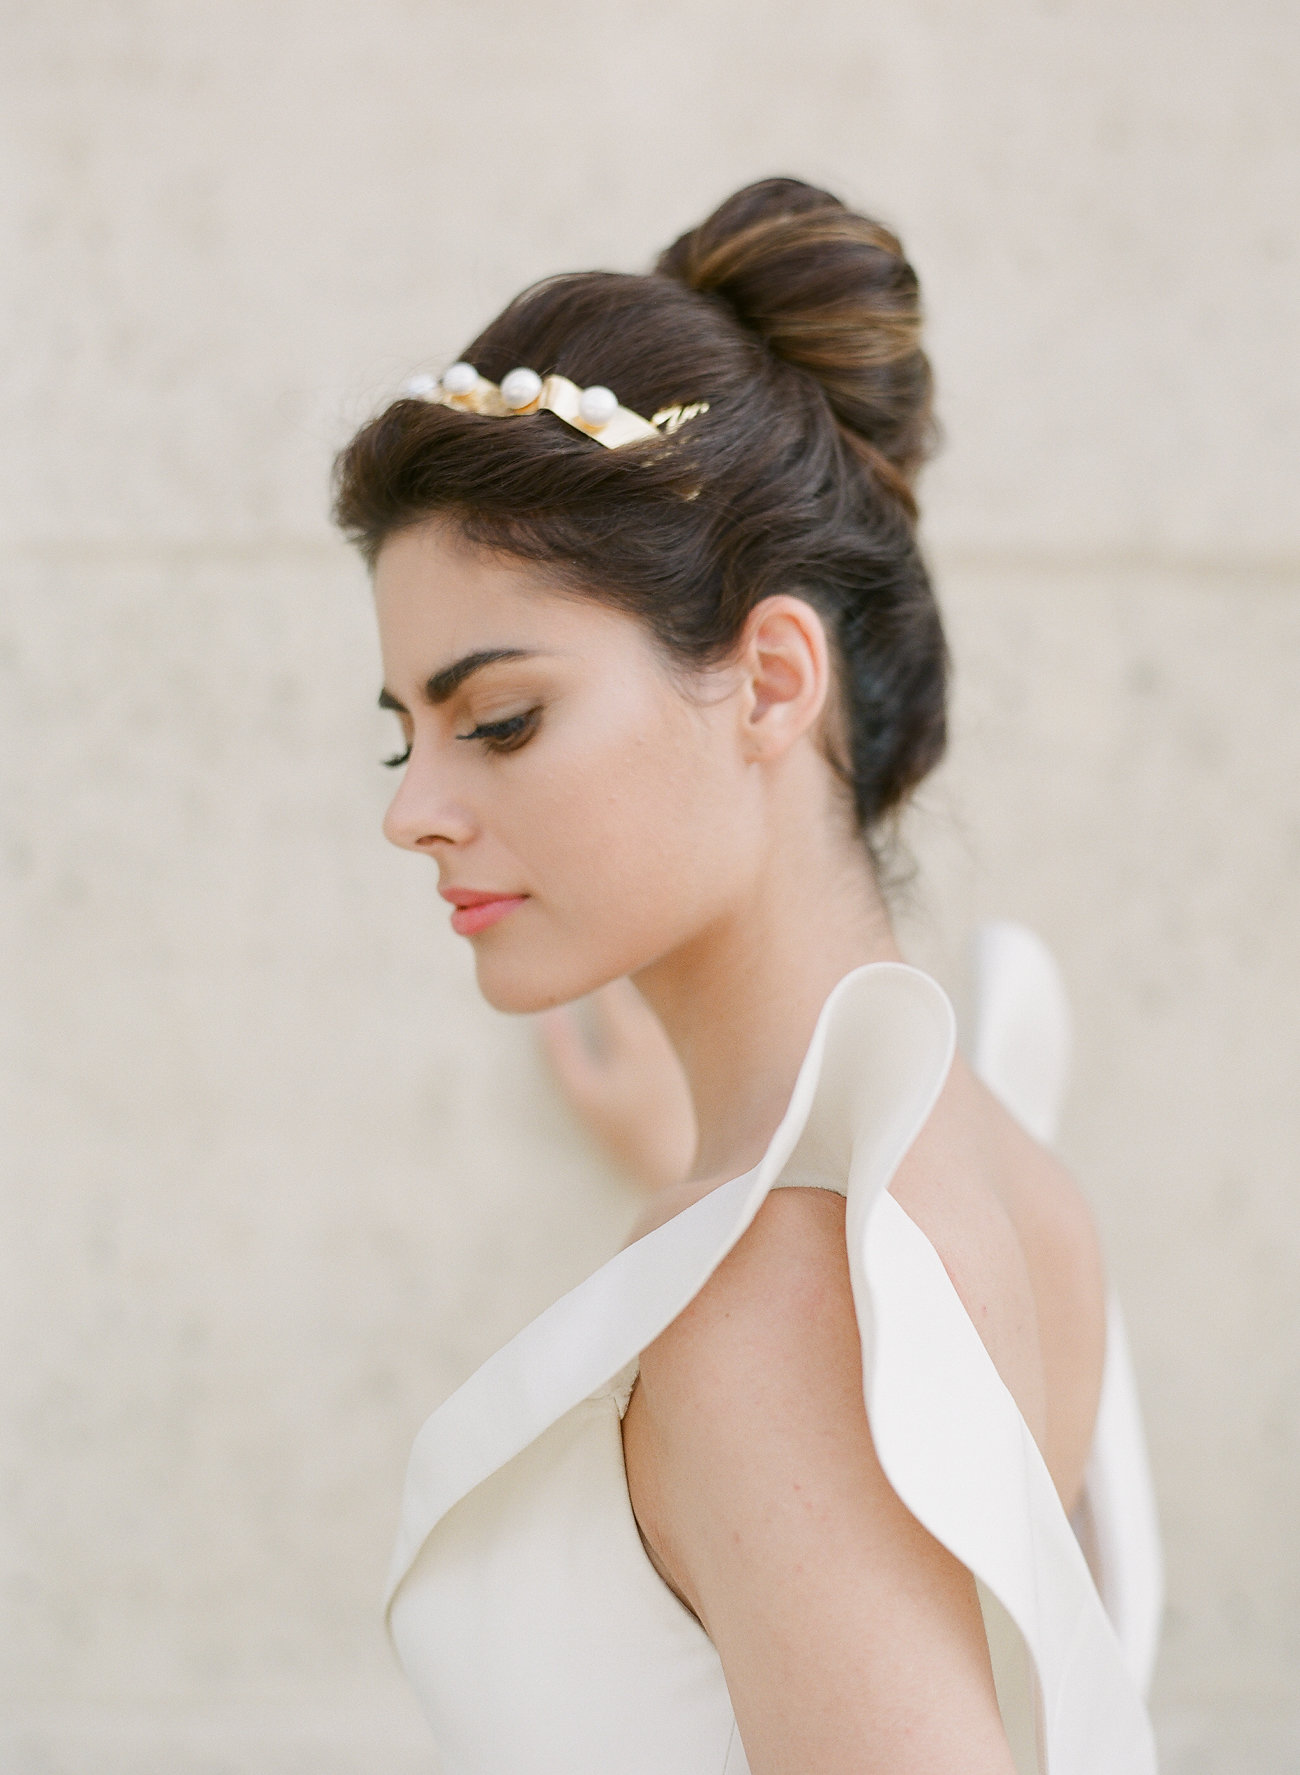 Romantic Bridal Hairstyles Photographed by Molly Carr Photography | Fine Art Bridal Hair and Makeup | Paris Wedding Photographer | Paris Film Photographer | France Destination Wedding | Musee Rodin